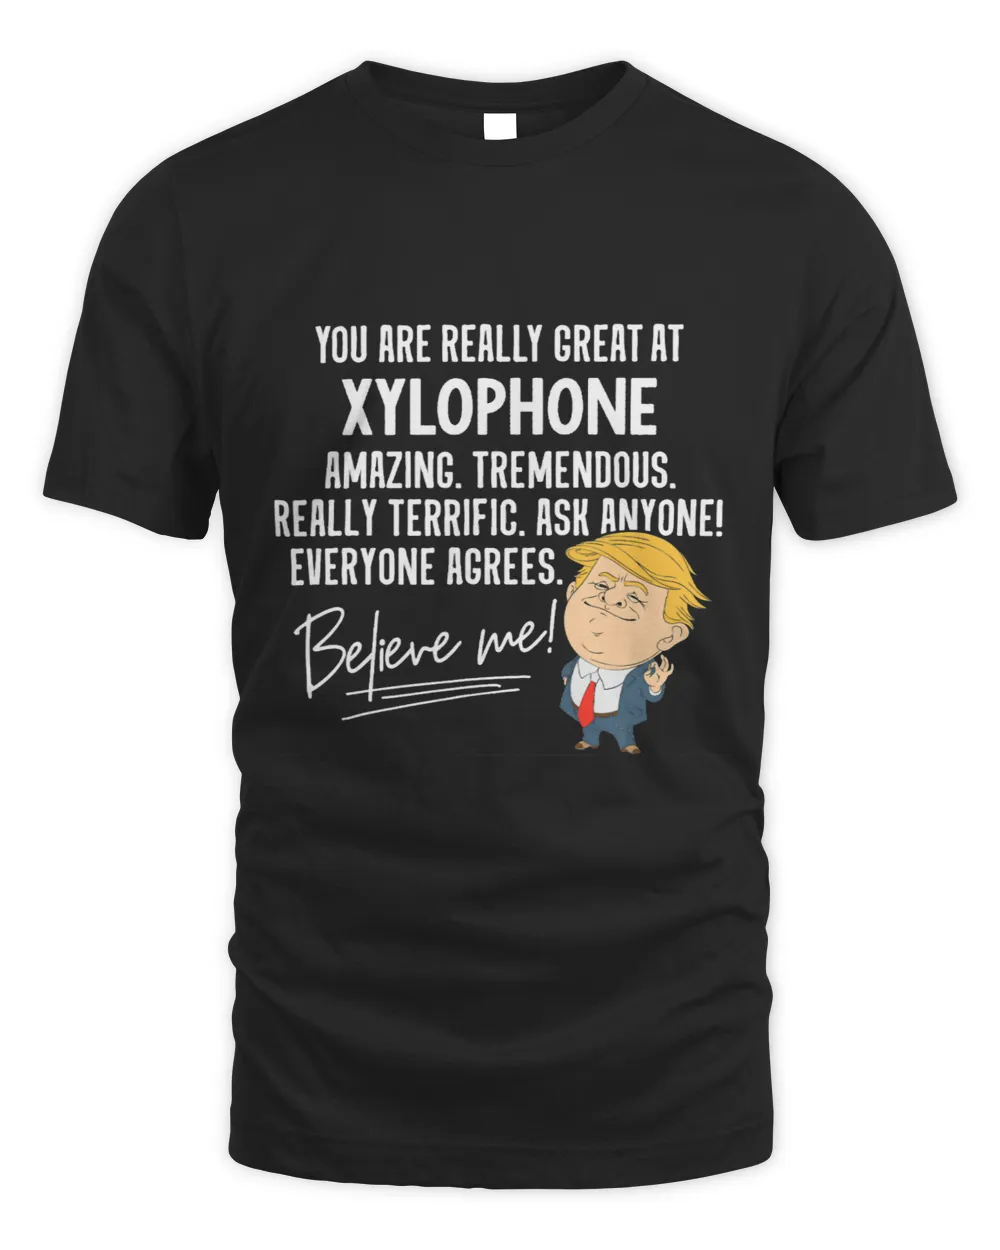 Funny Trump Really Great Xylophone Gift Shirt